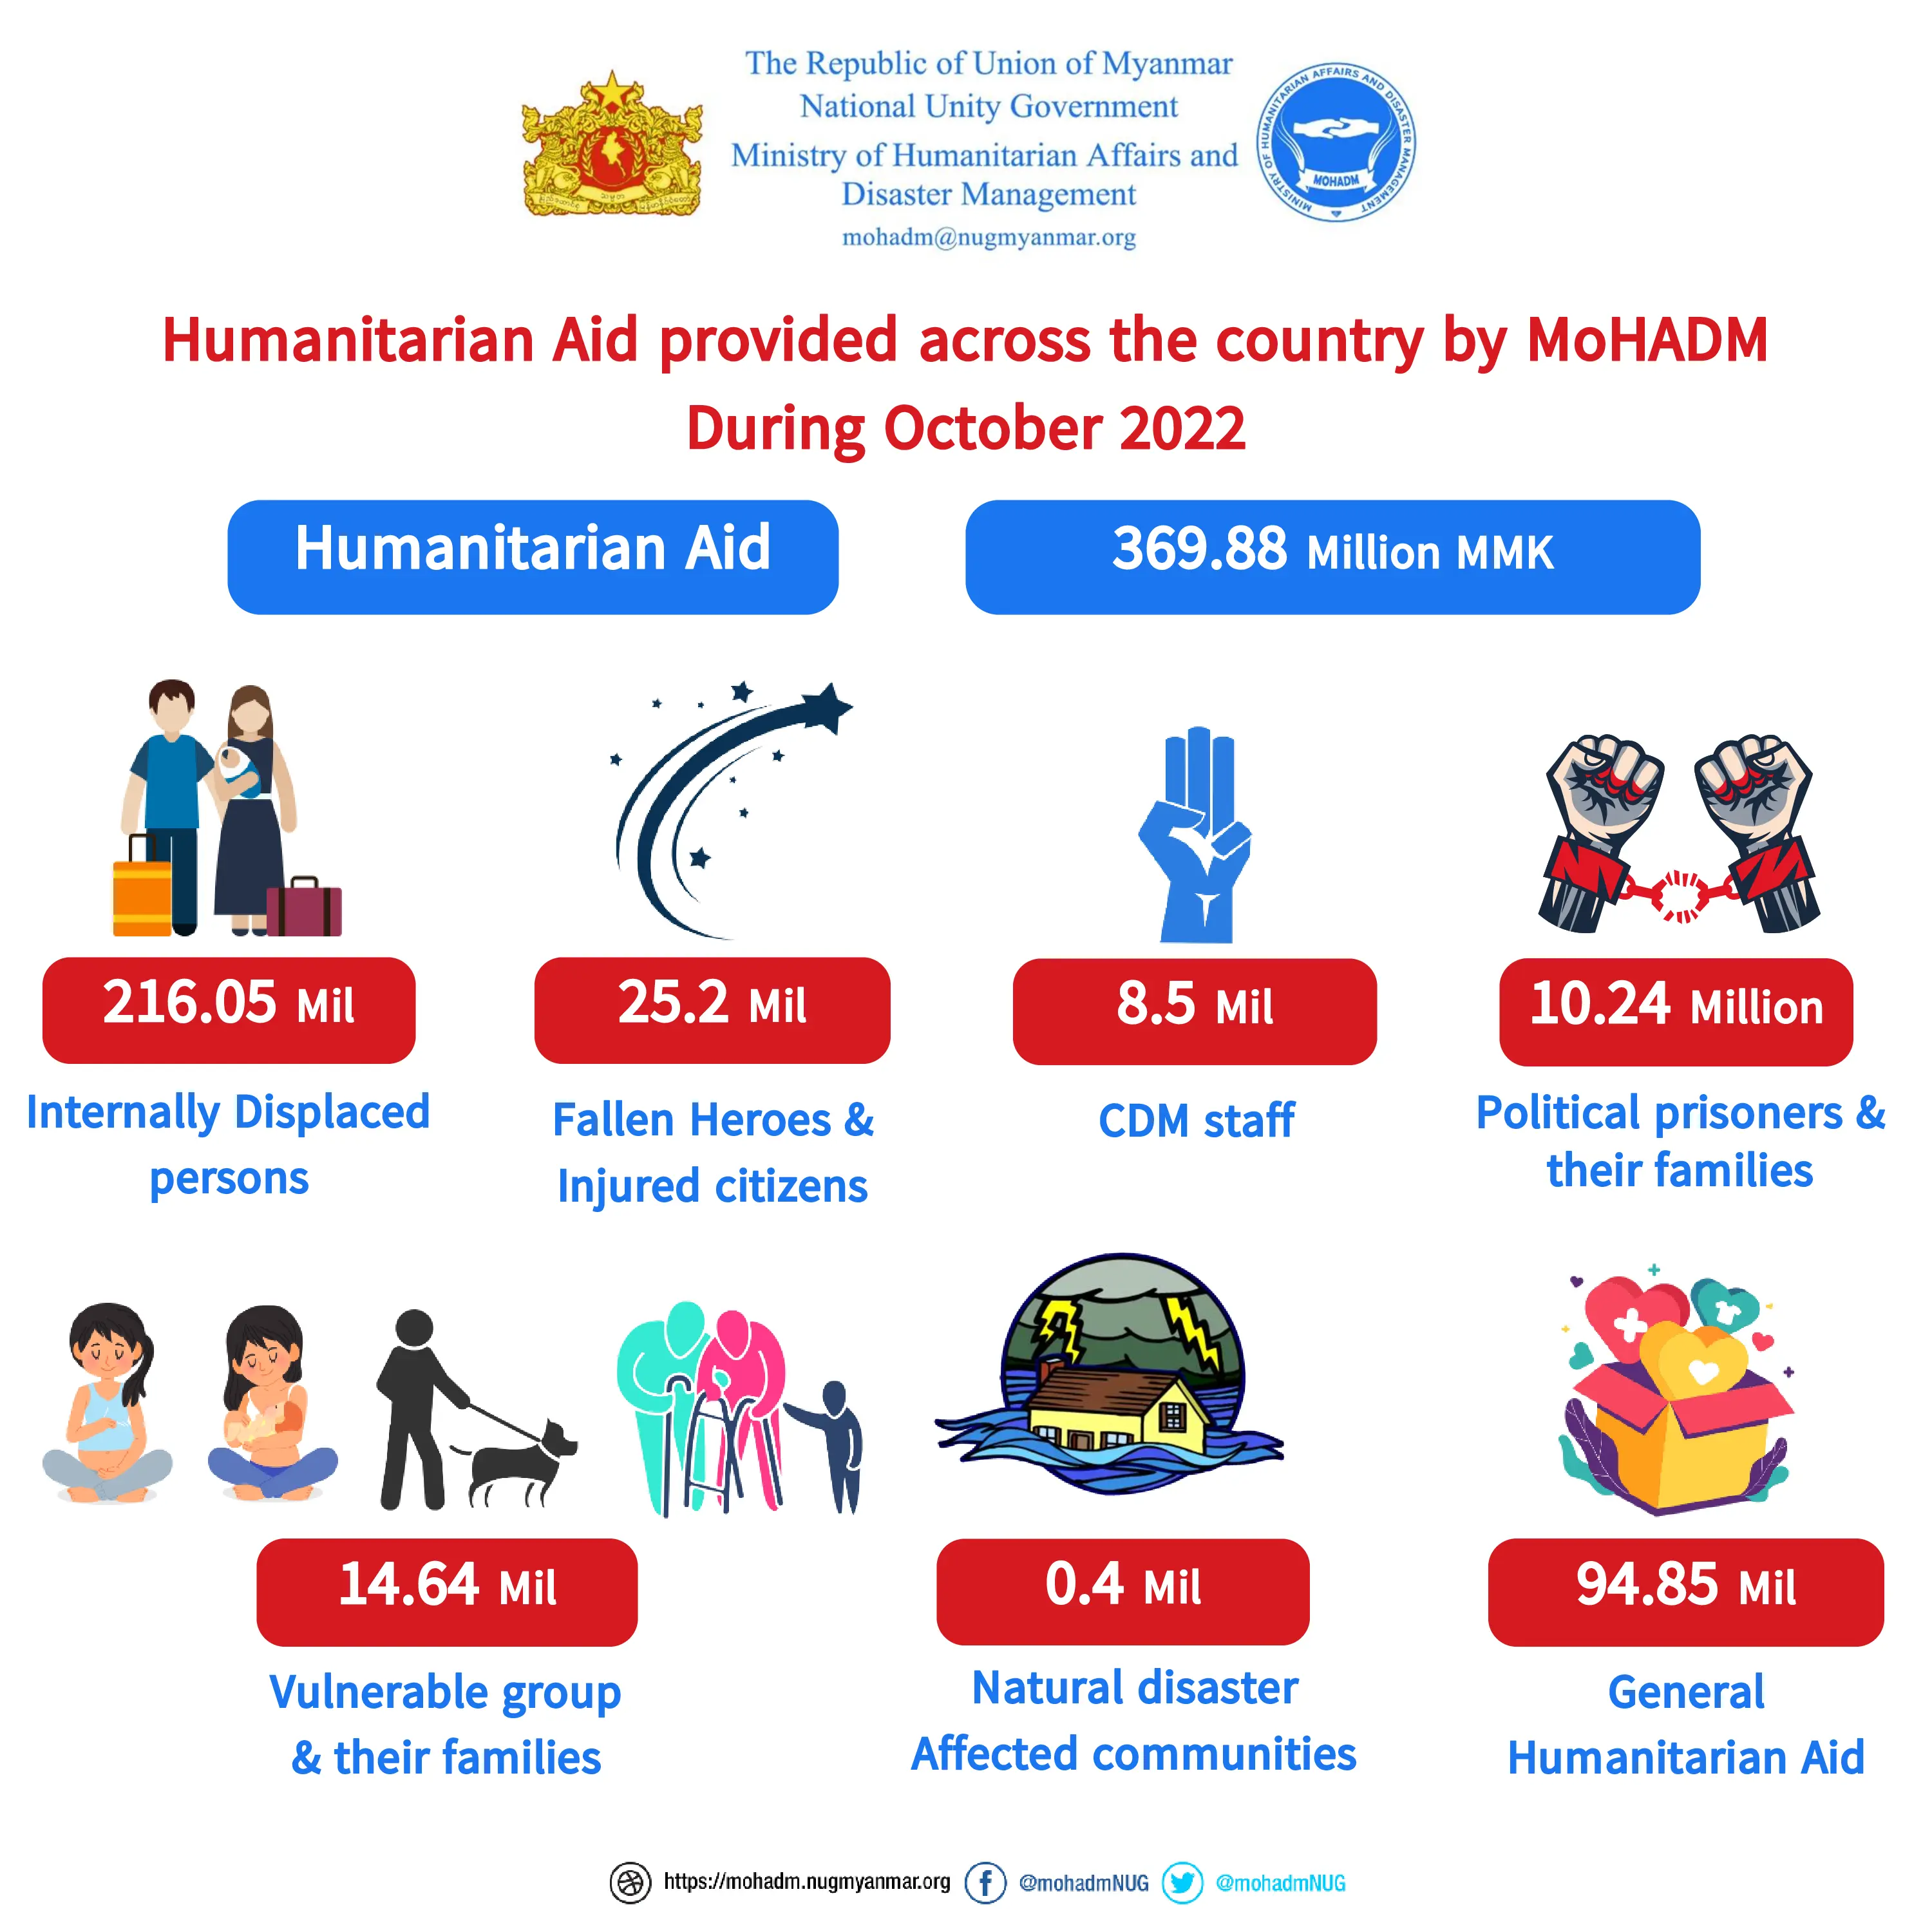 Summary of humanitarian aid provision by MoHADM (October 2022)